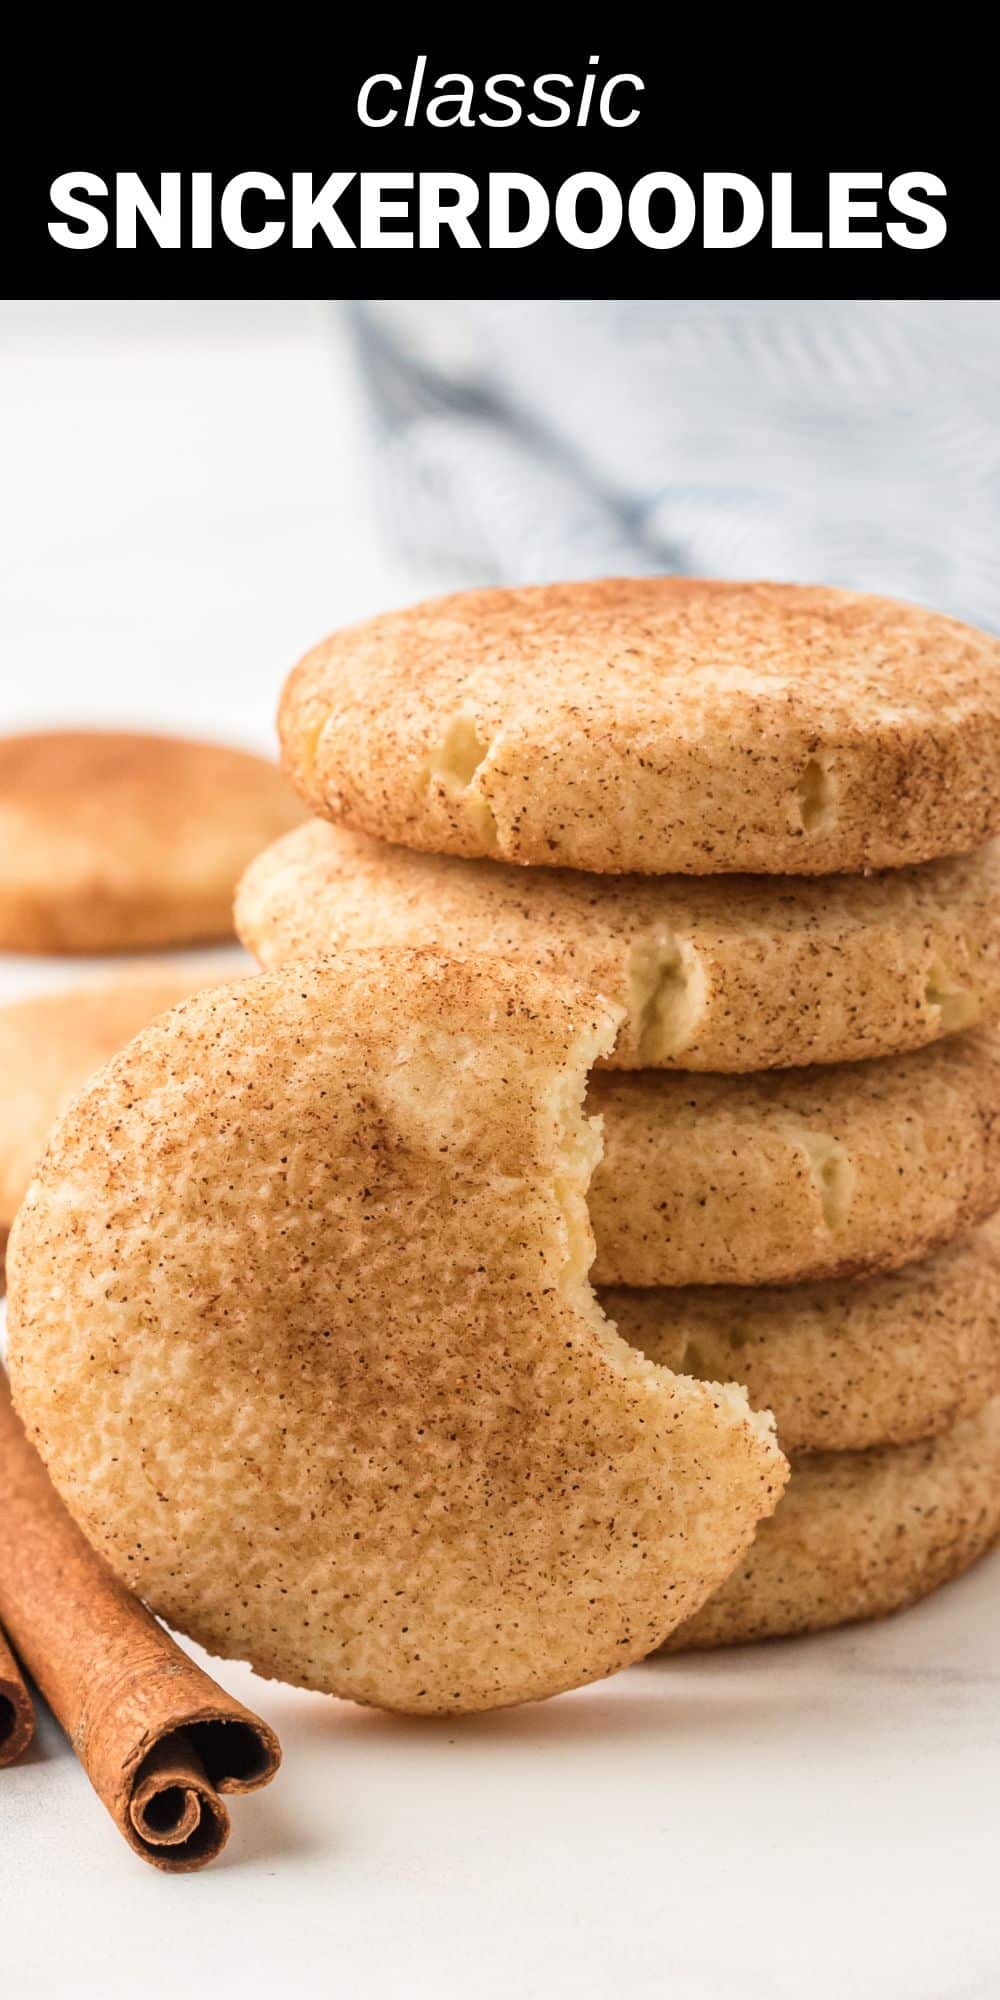 This Snickerdoodle Recipe makes the most delicious and buttery soft cookies with the perfect hint of warm cinnamon spice. 